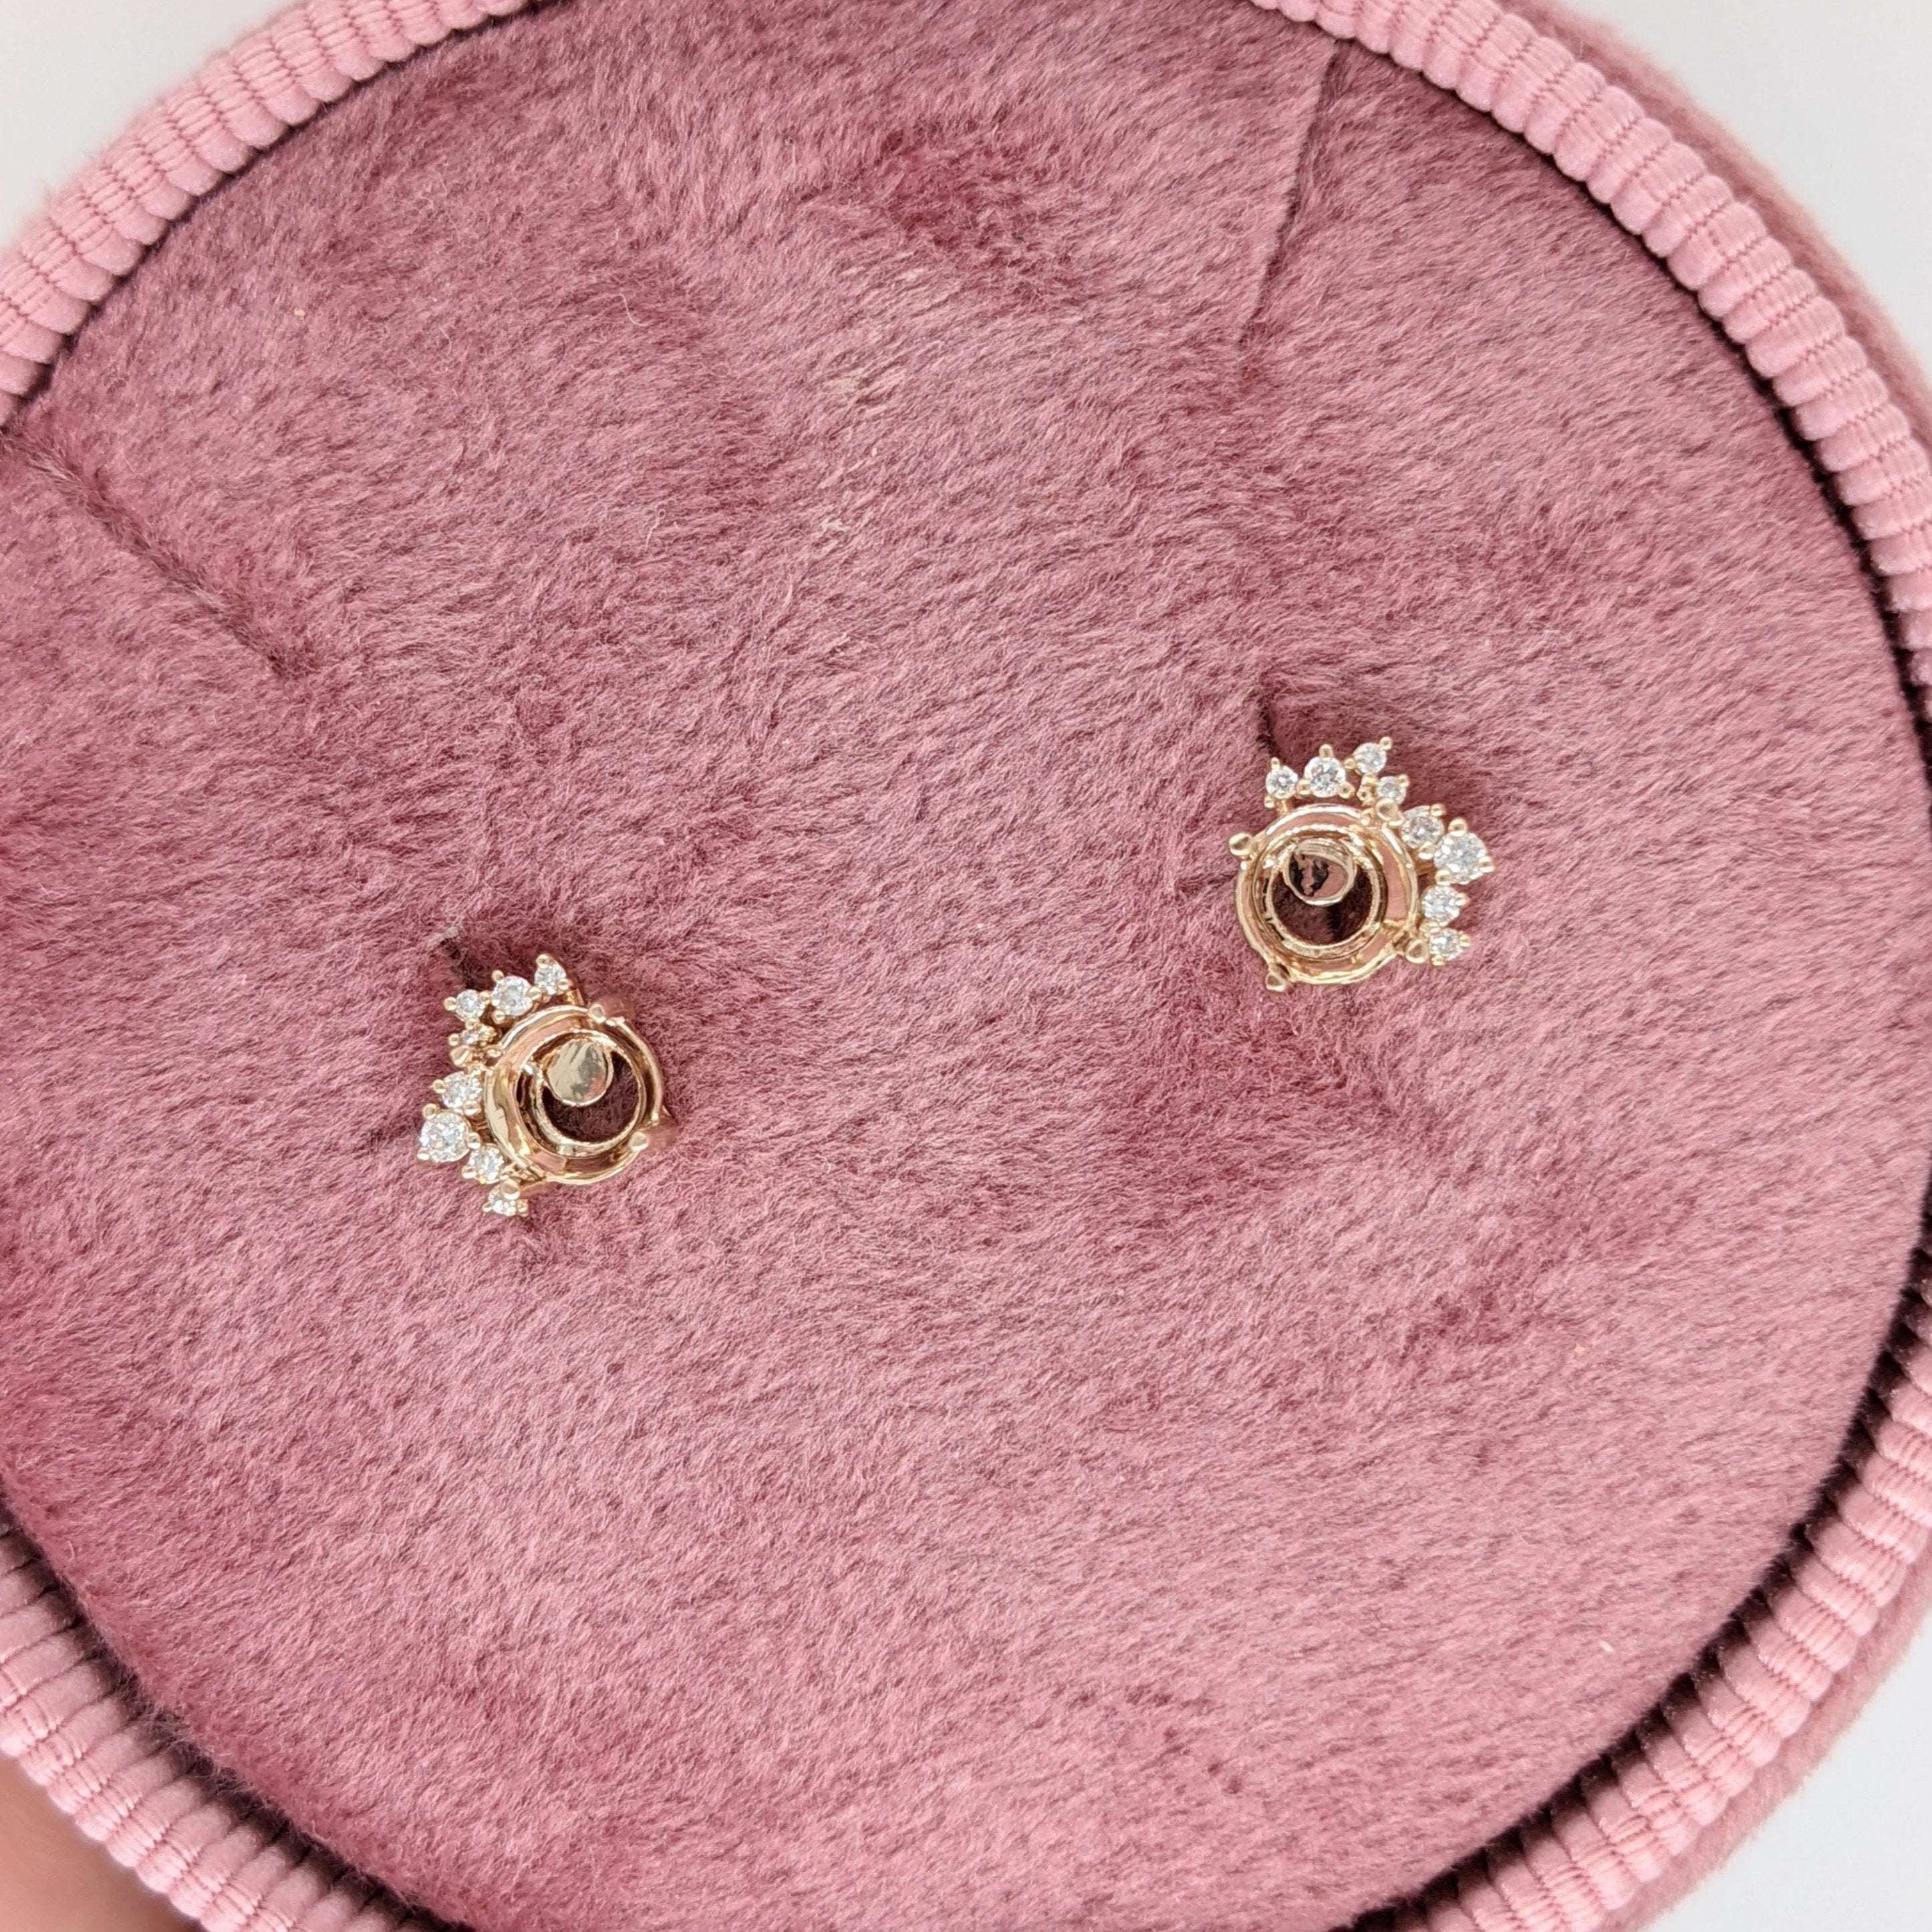 Asymmertrical Design Stud Earring Semi-Mount in 14k Solid Gold w Diamond Accents | Round 5mm | Secure Push Backs | Customizable